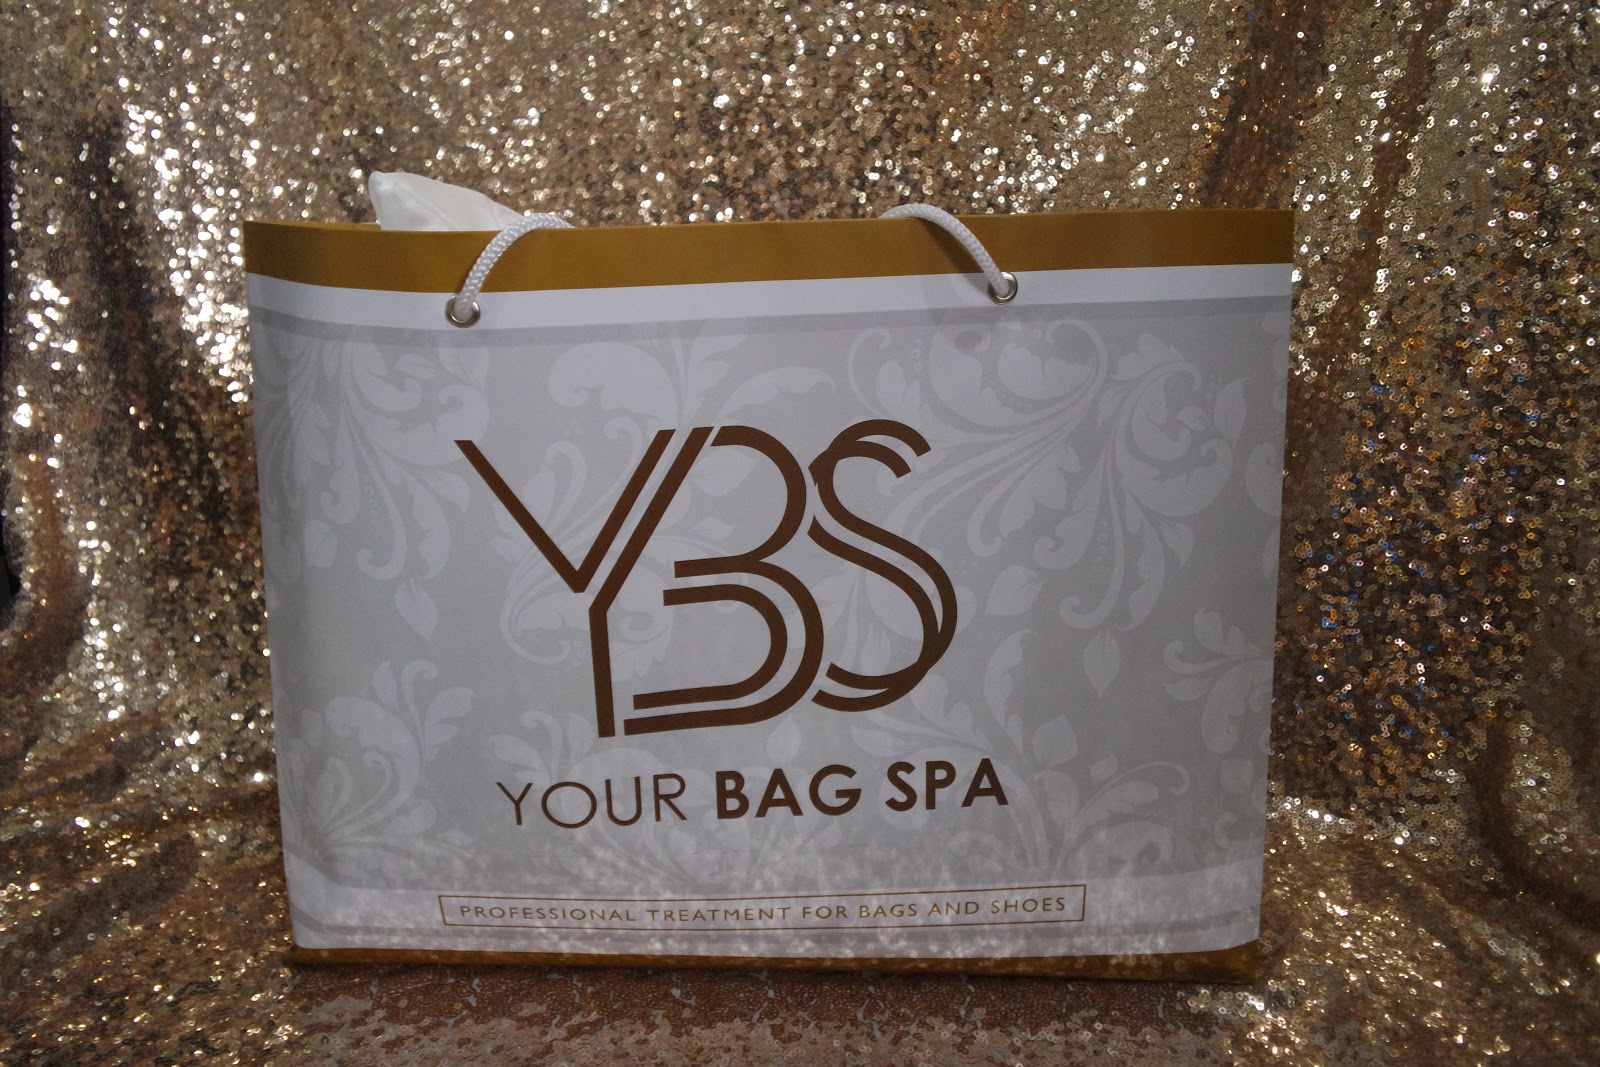 Your Bag Spa » Services